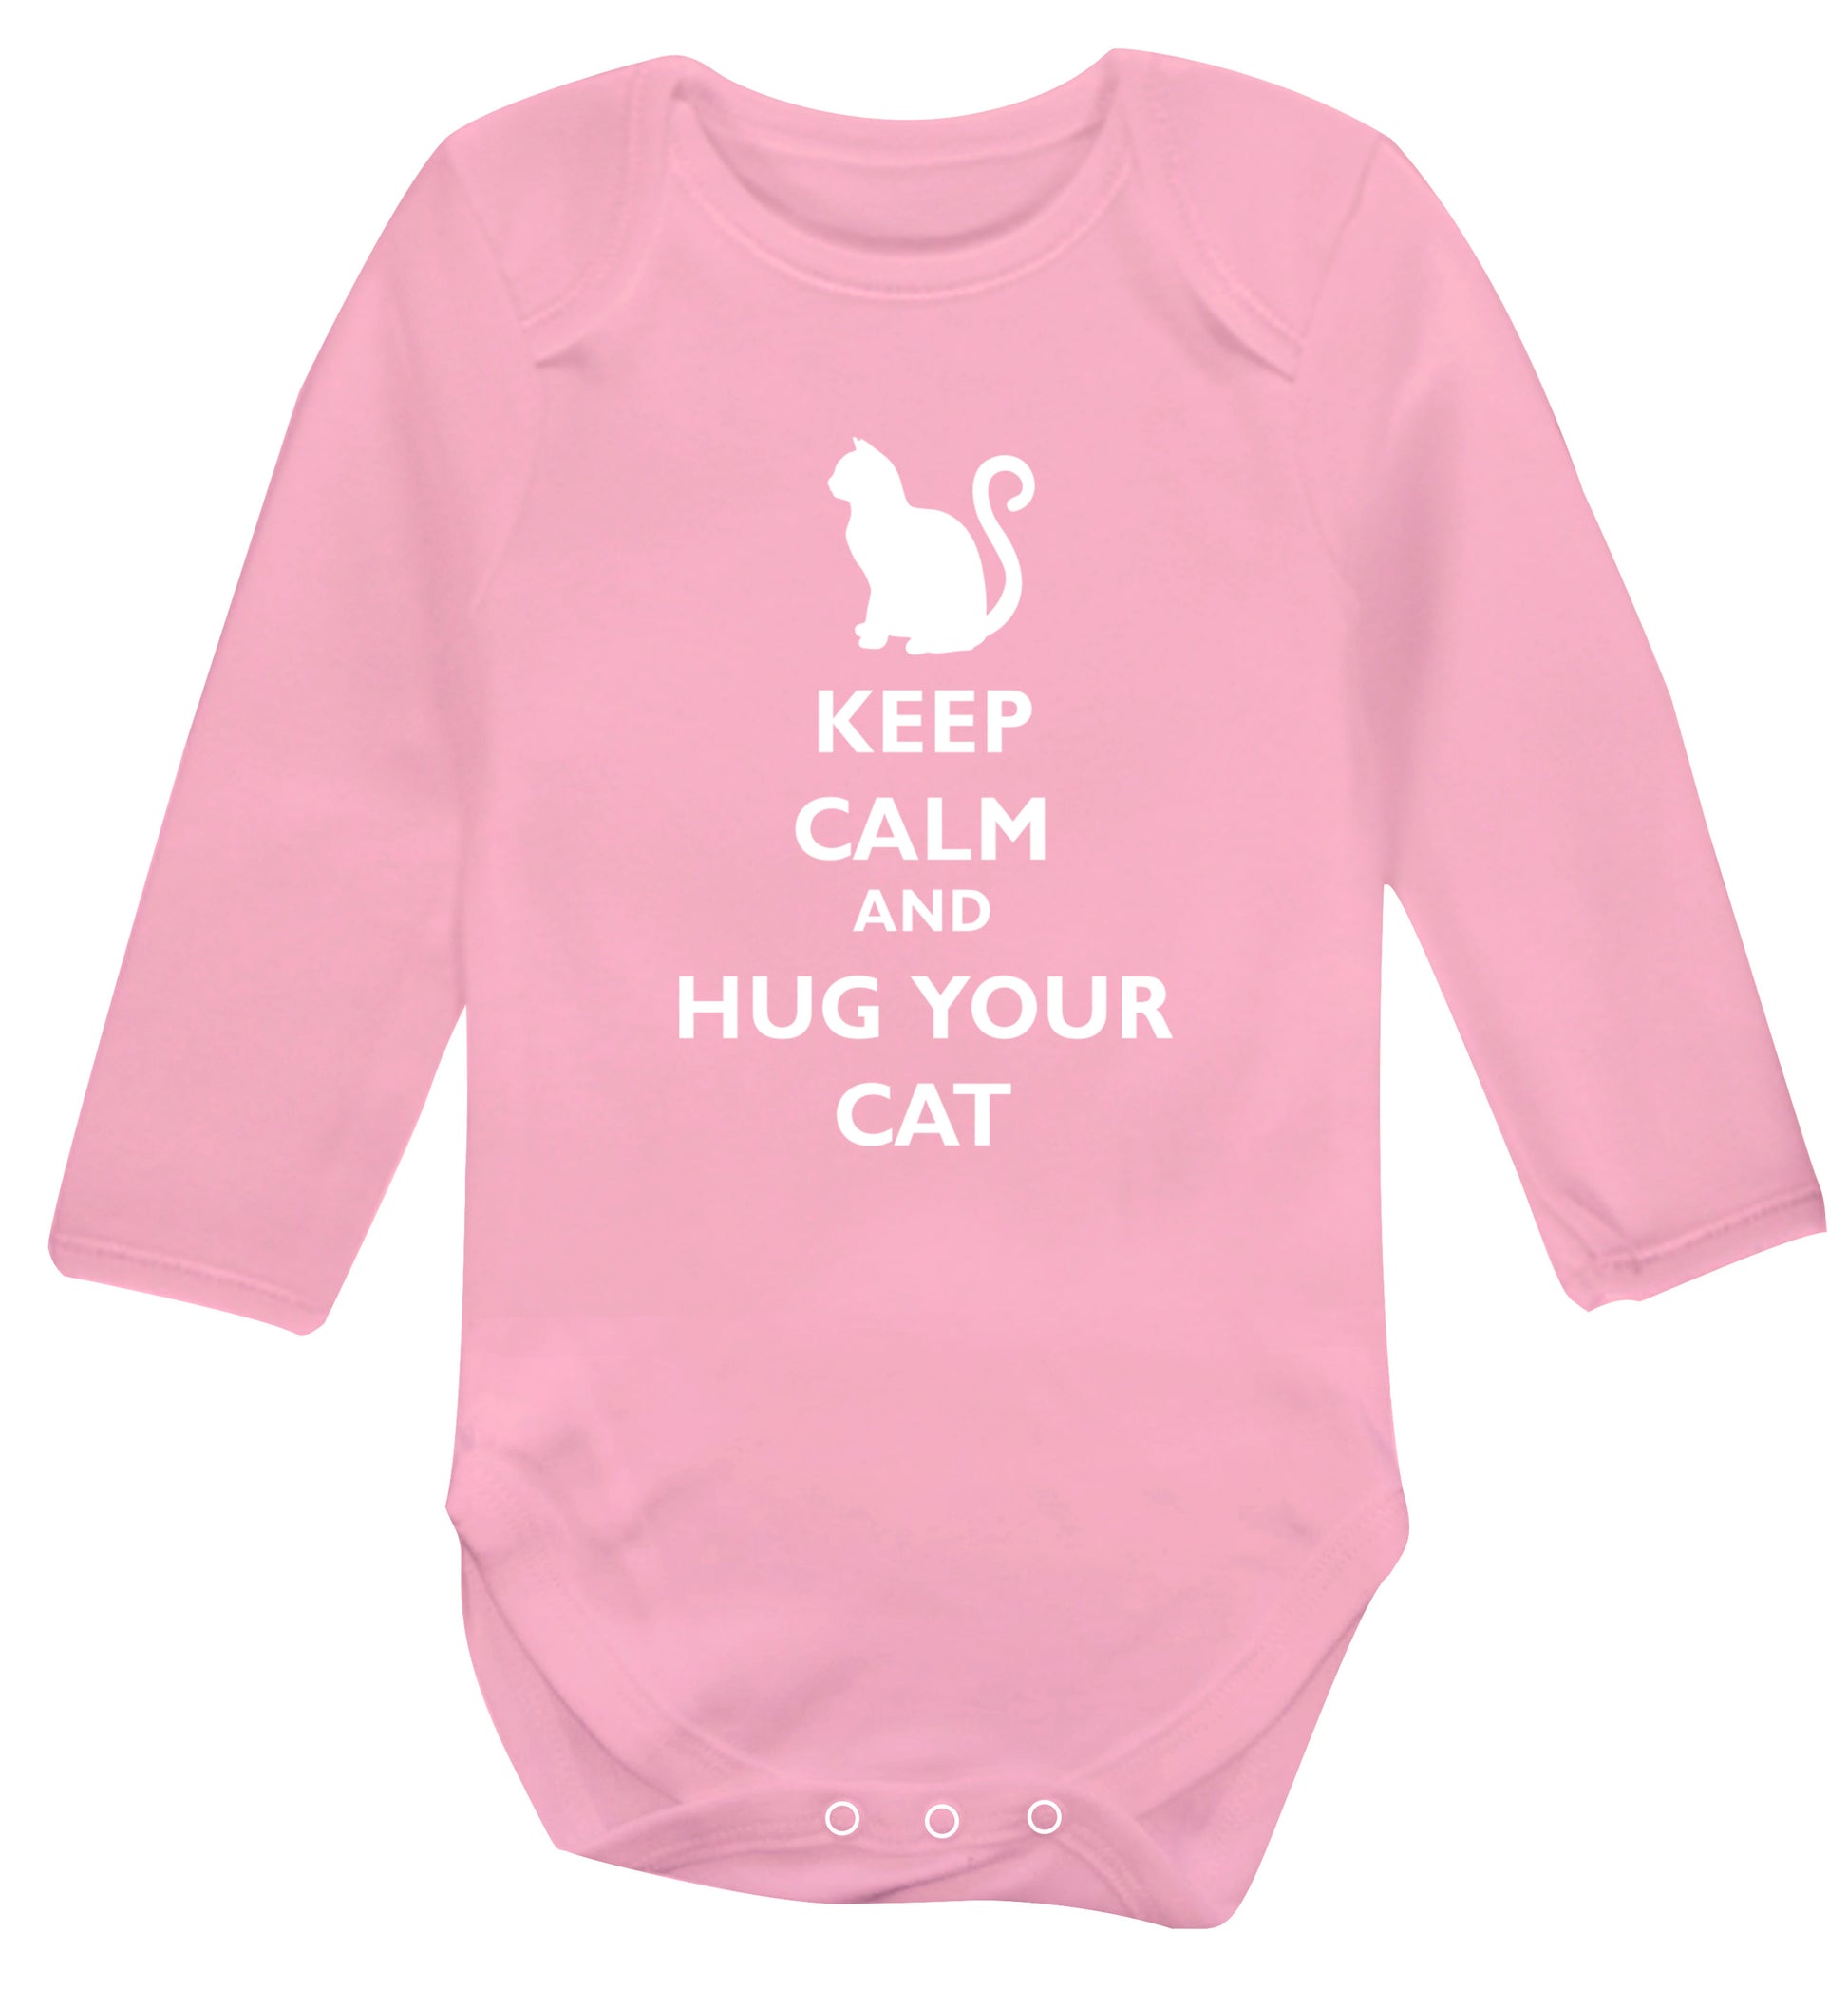 Keep calm and hug your cat Baby Vest long sleeved pale pink 6-12 months